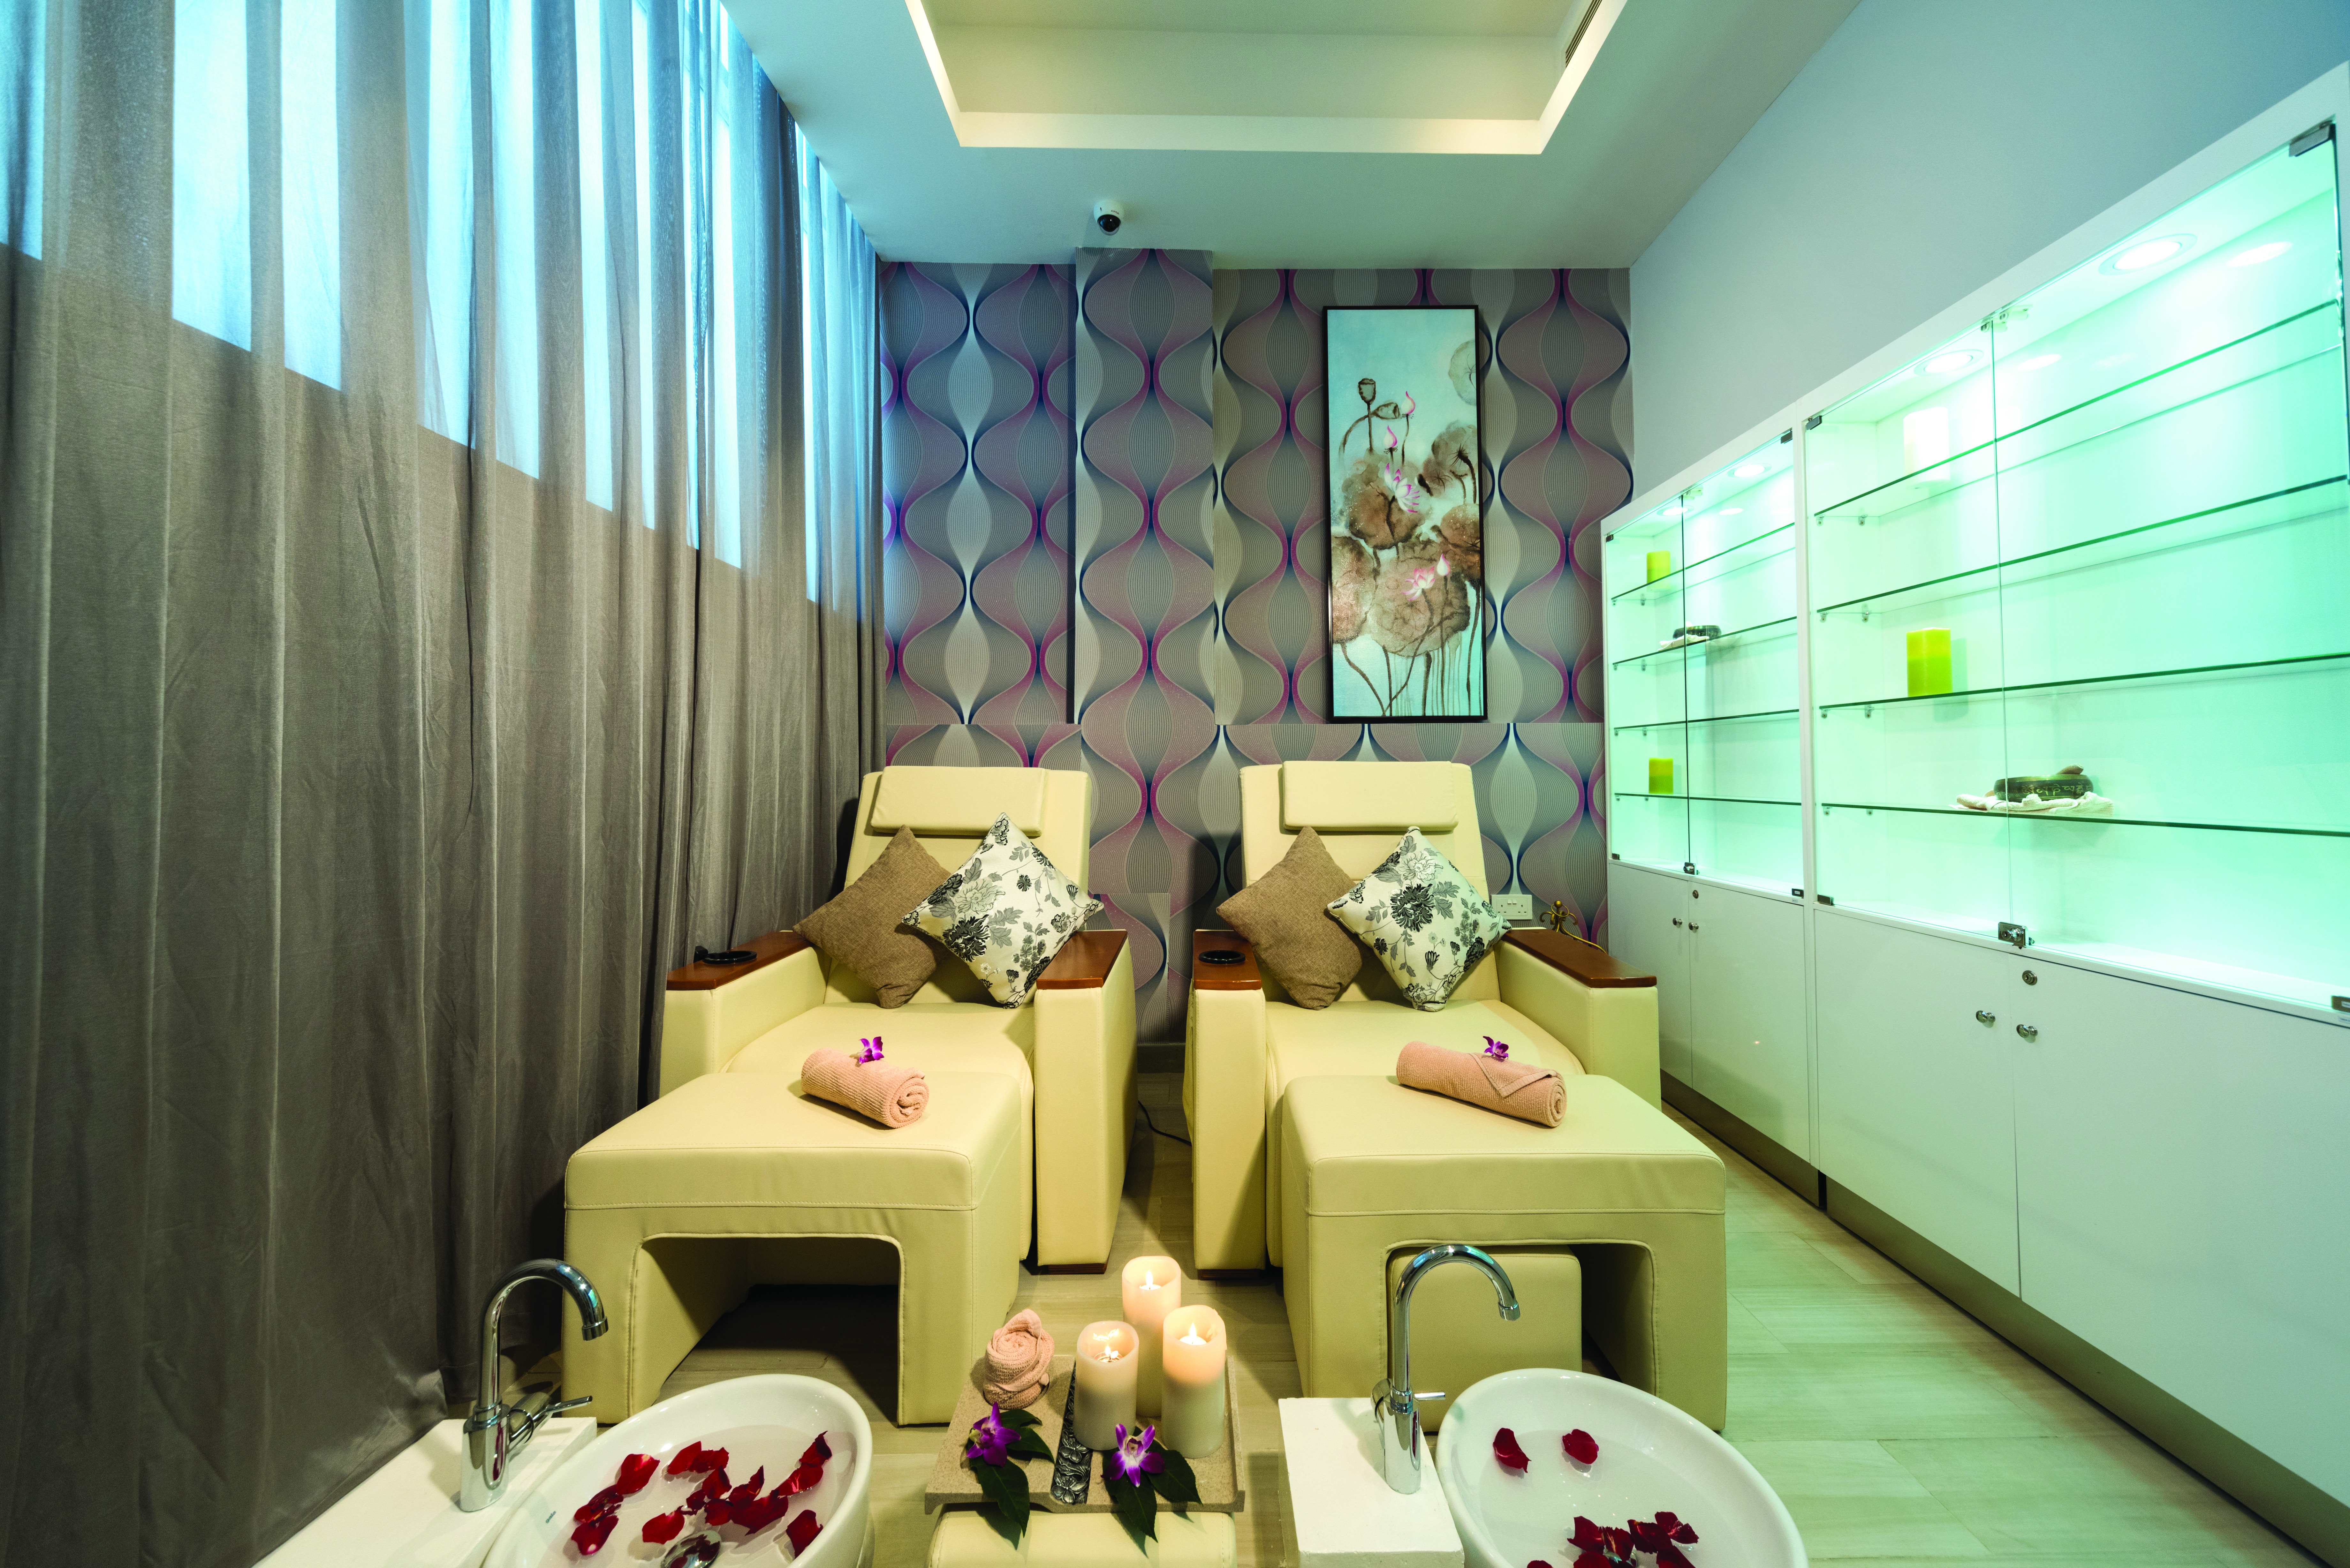 Pamper yourself at the Cenvaree Spa this weekend